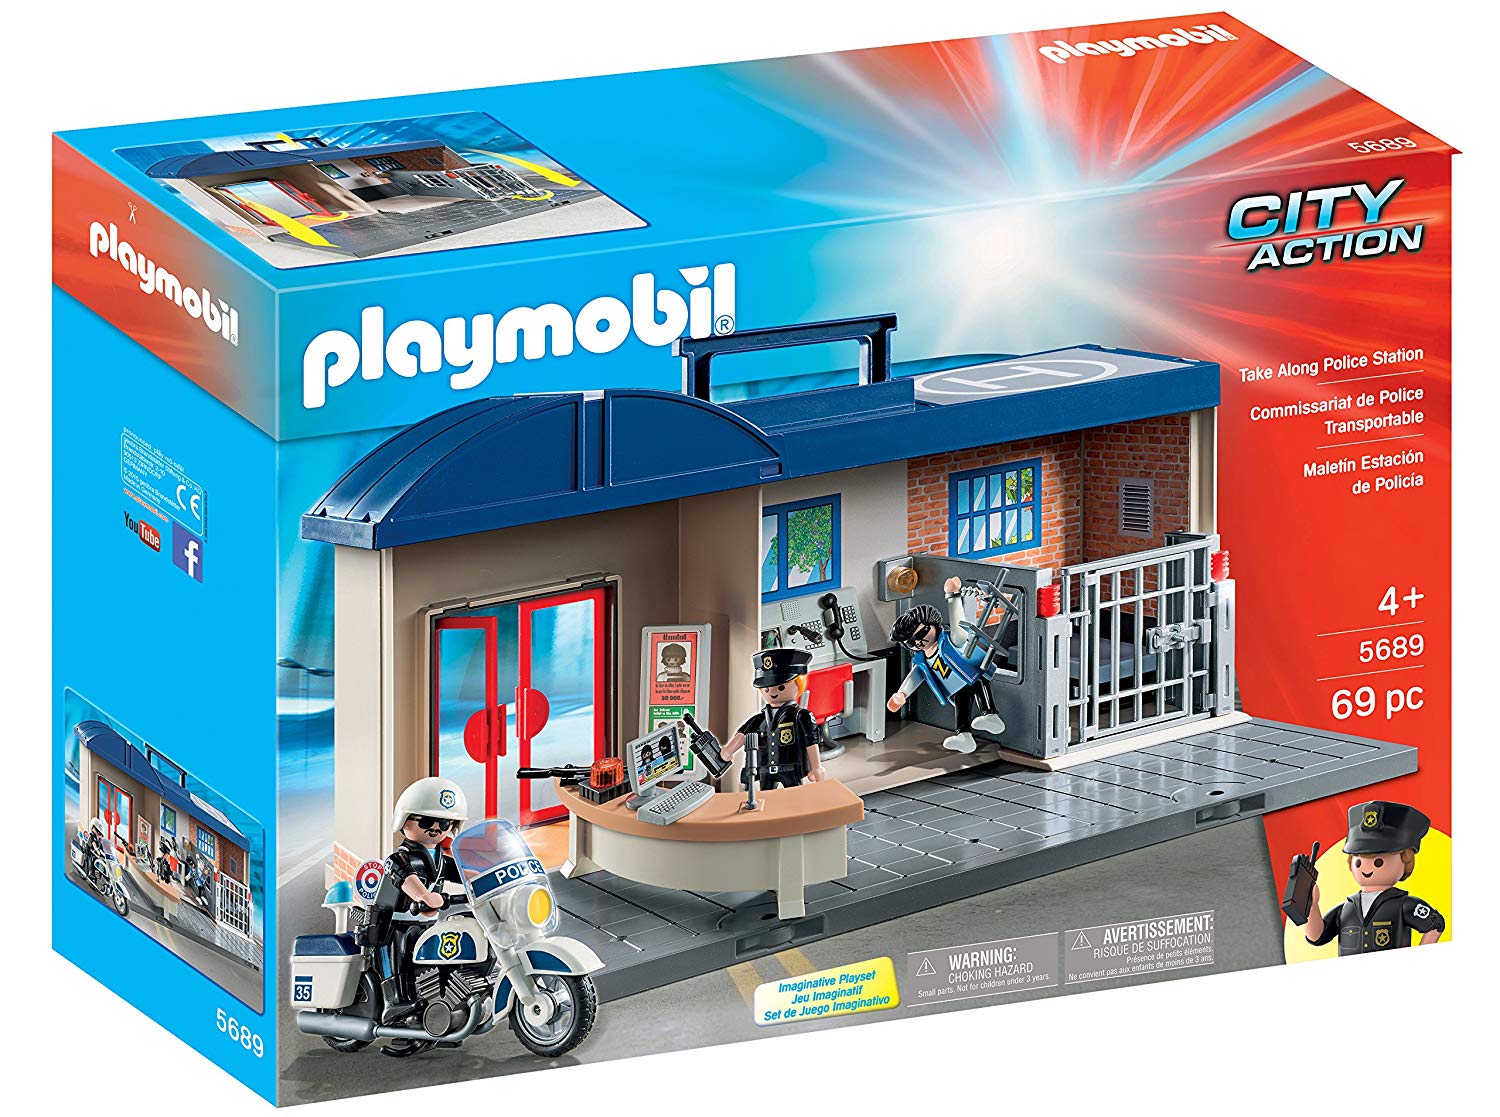 Playmobil City Action 5689 Case Multi-Coloured